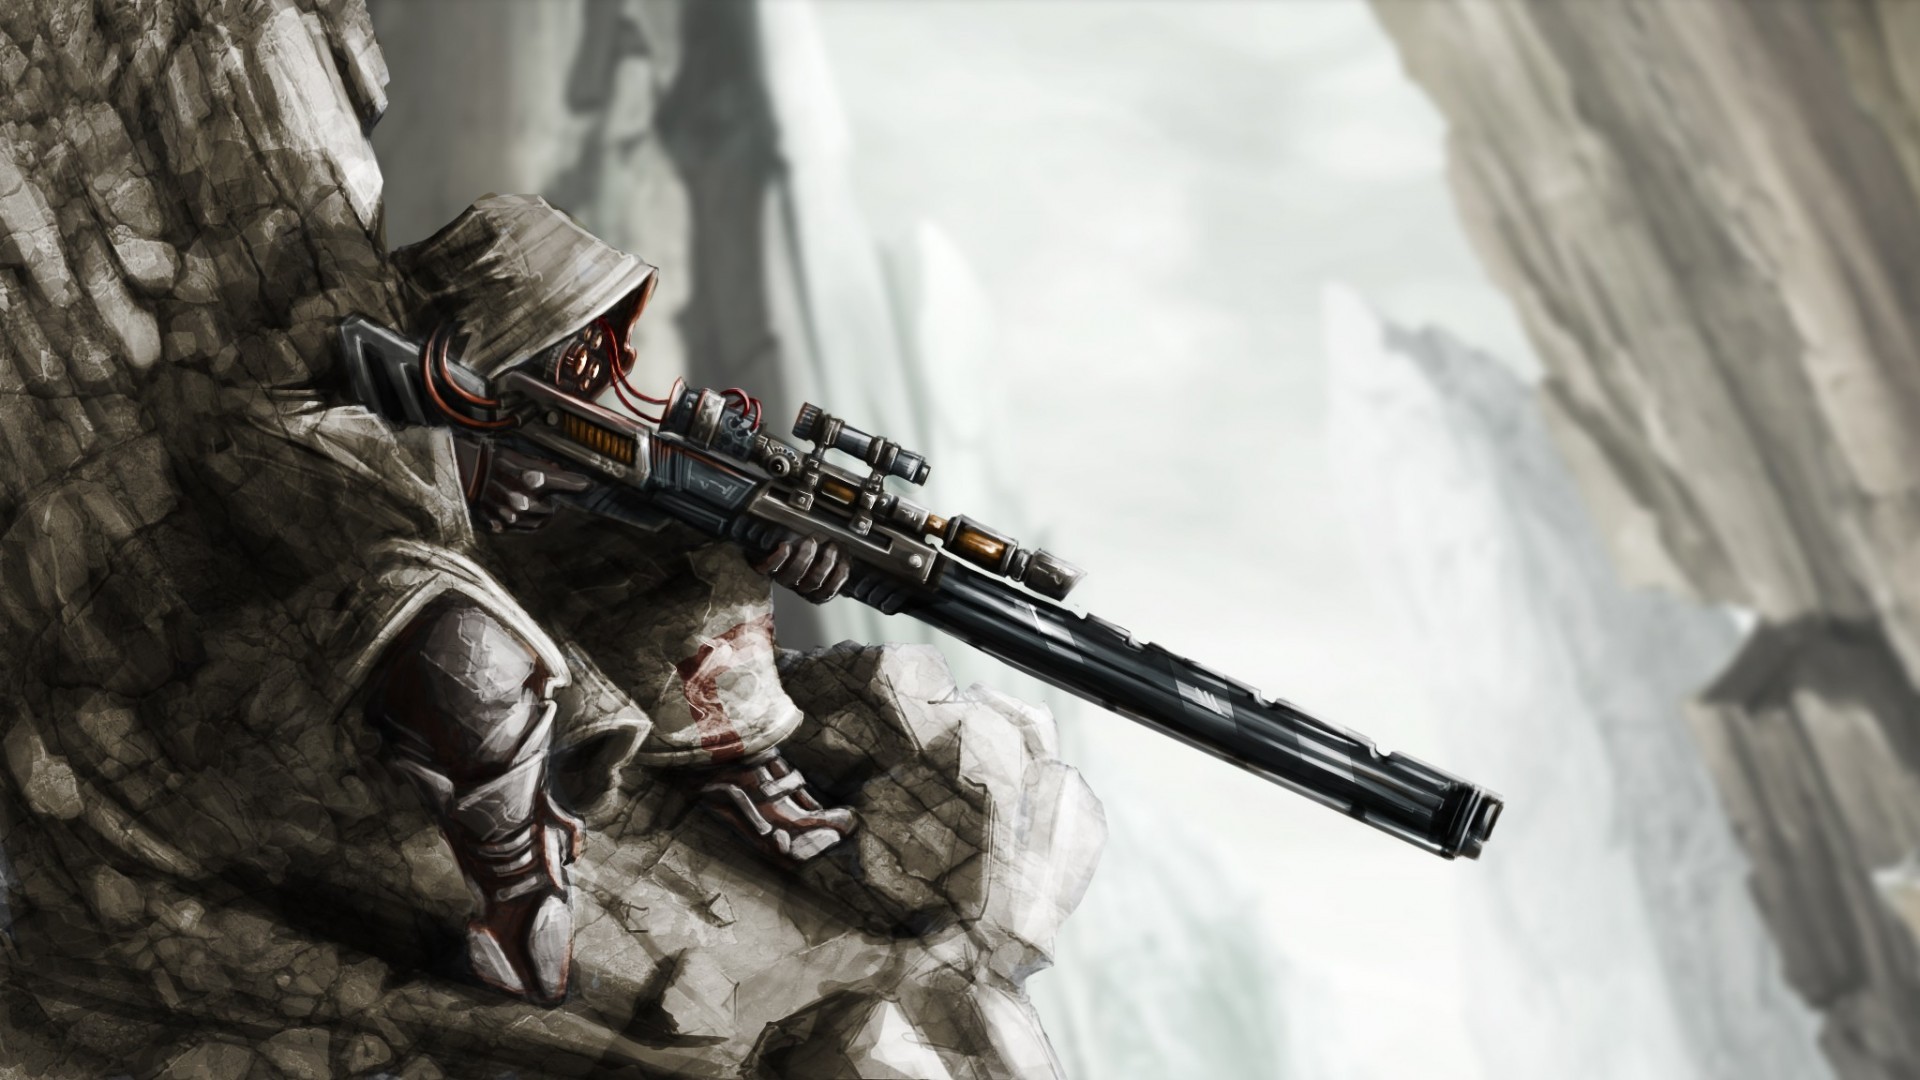 General 1920x1080 Killzone sniper rifle rifles artwork video game art video games weapon science fiction